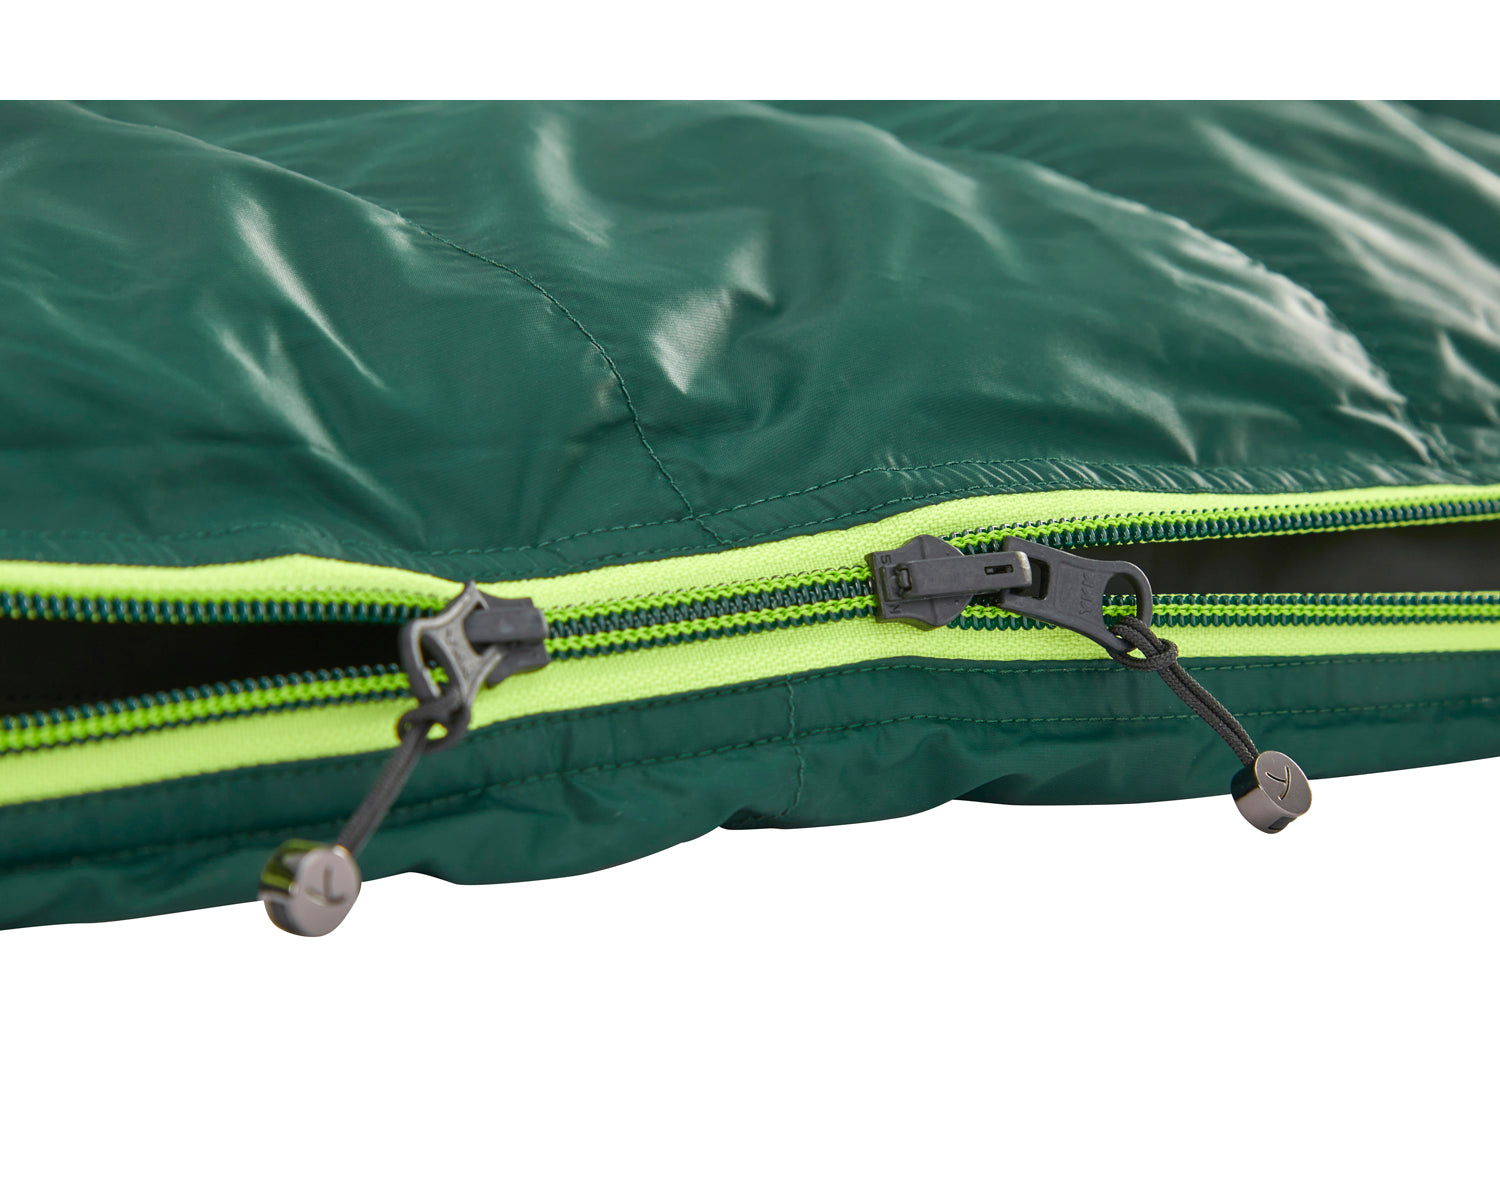 Tension Mummy 300 (LEFT ZIP) - Scarab/Lime